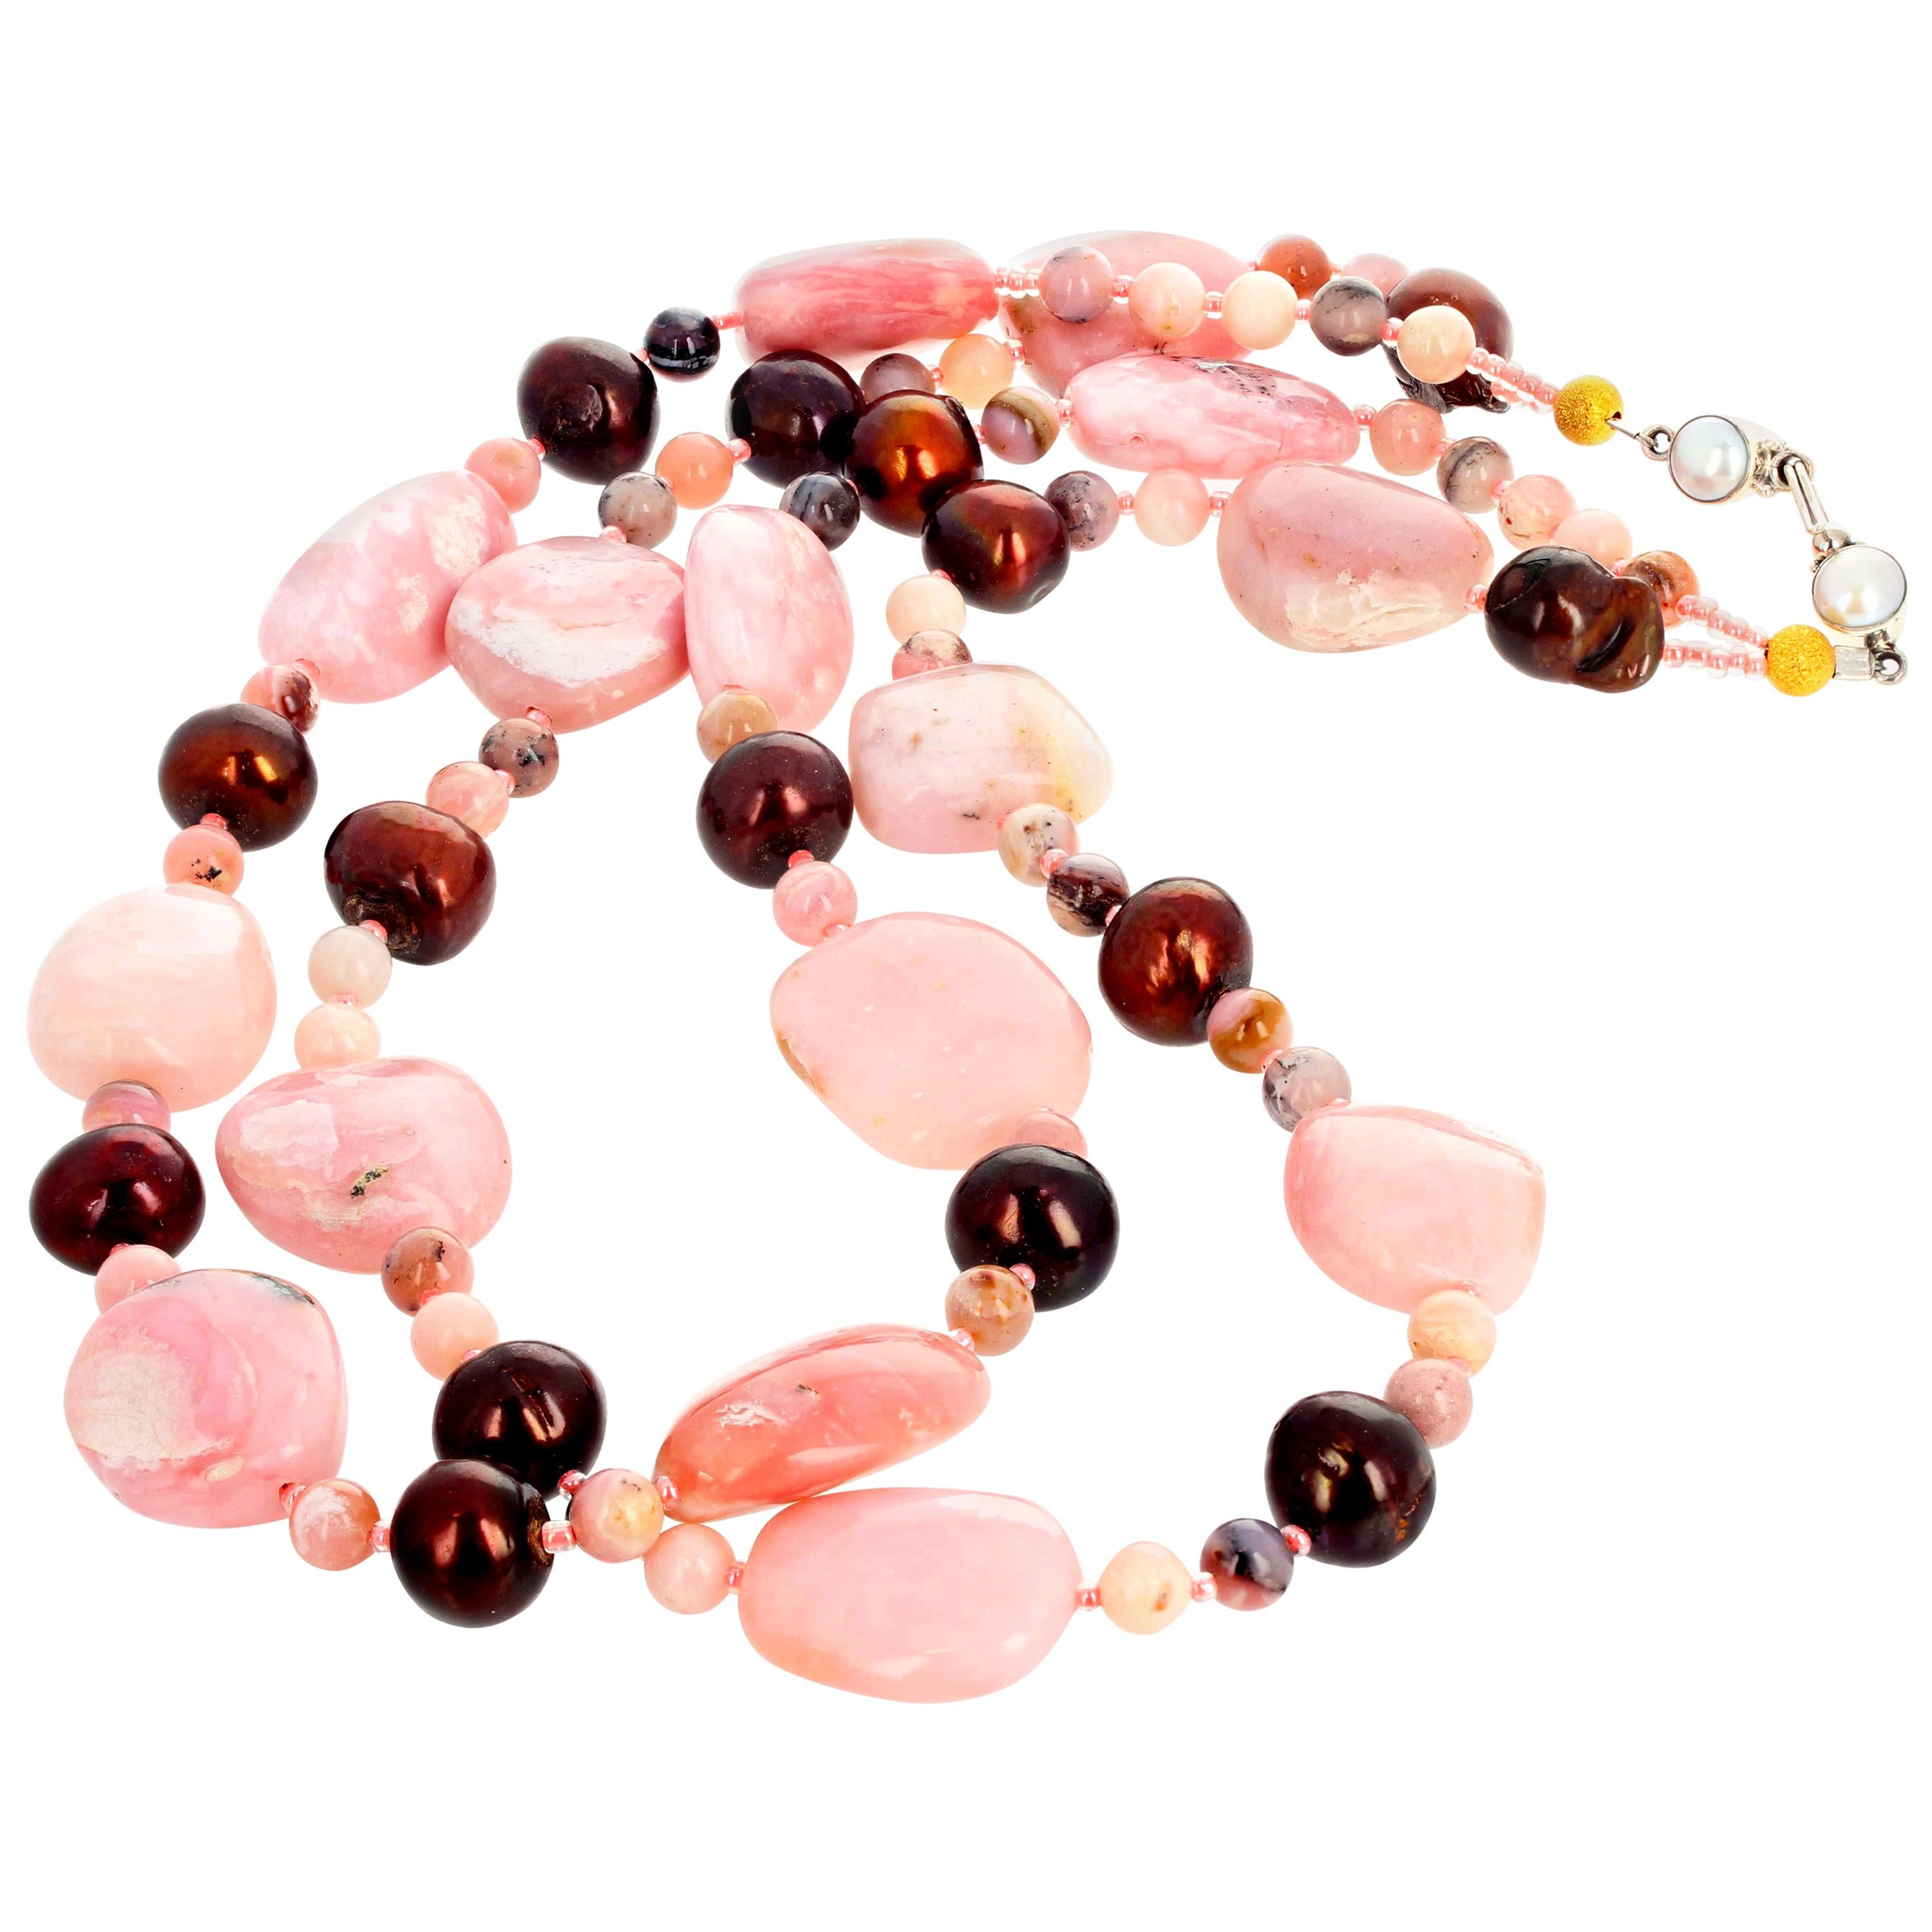 AJD  Chic Dramatic Peruvian NATURAL Pink Opal & Cultured Pearl Necklace